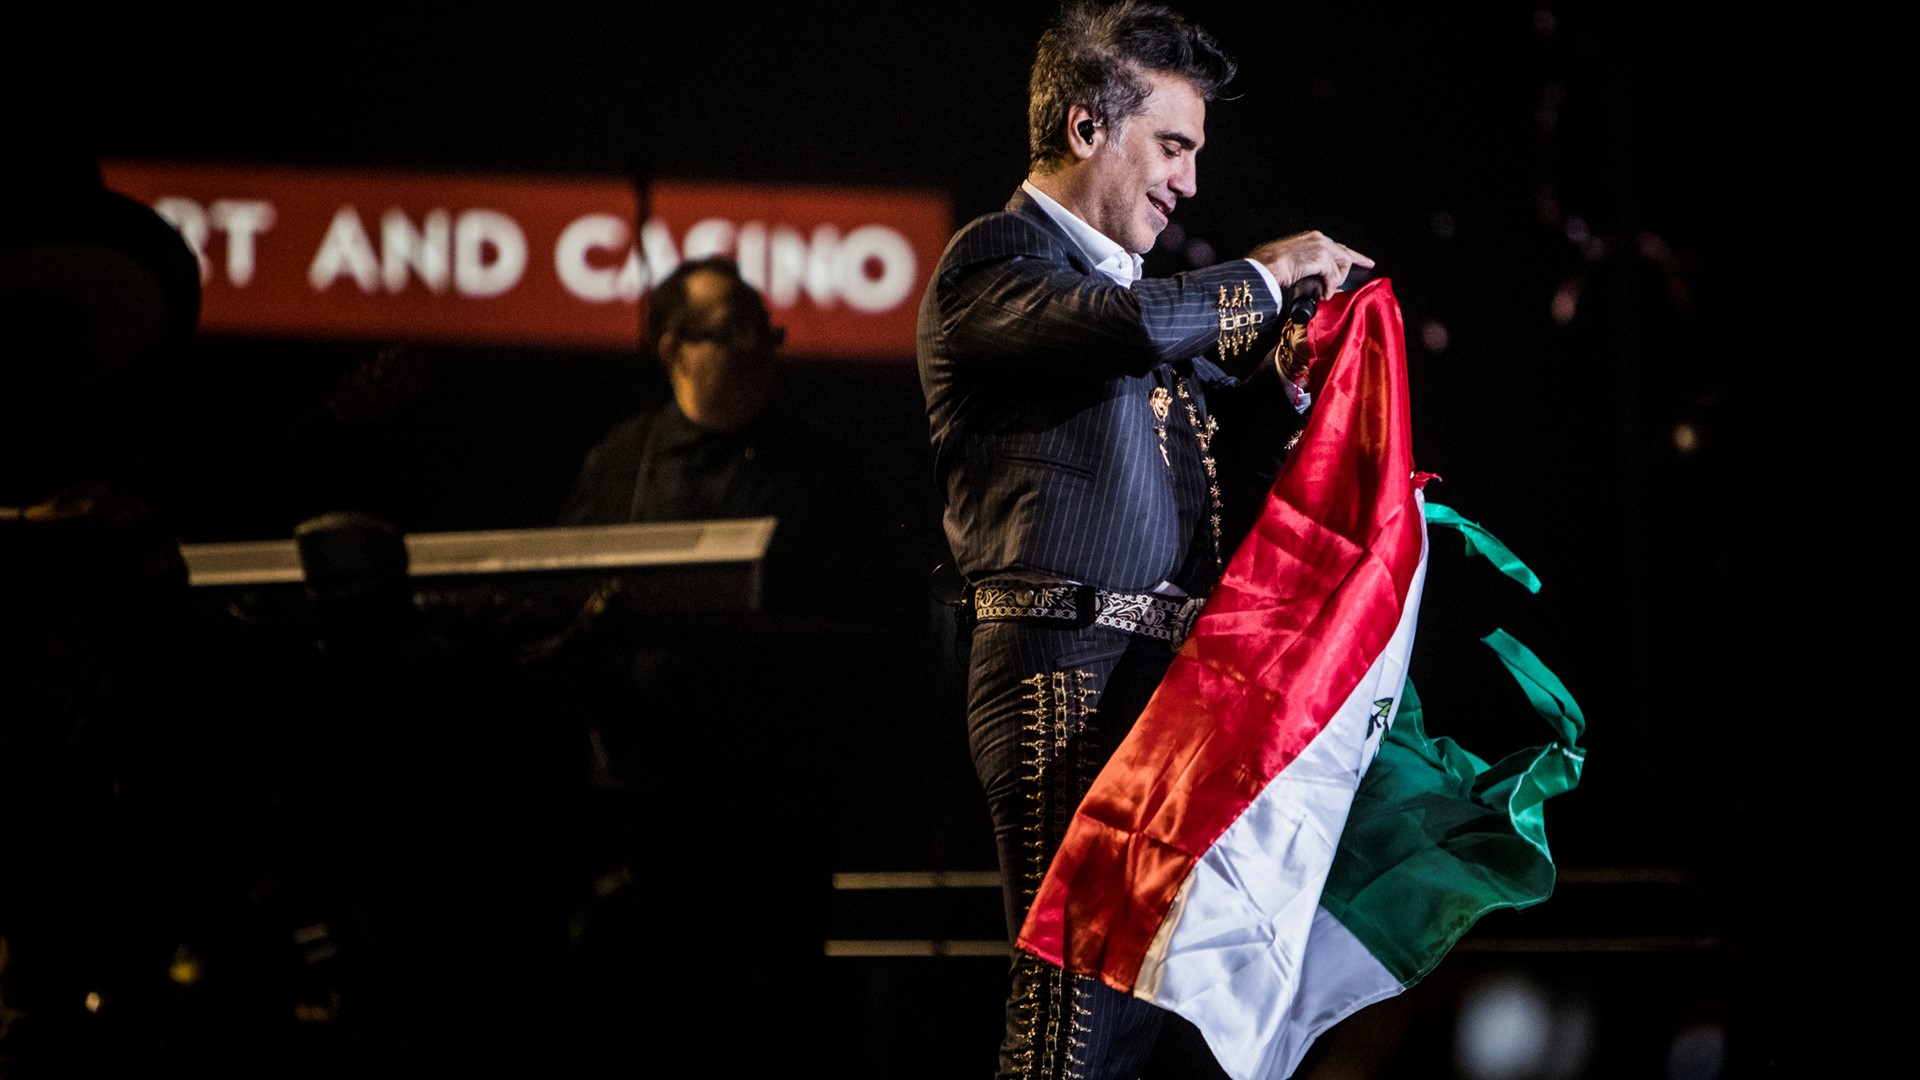 Alejandro Fernández performs during a concert at The Mandalay Bay Events Center